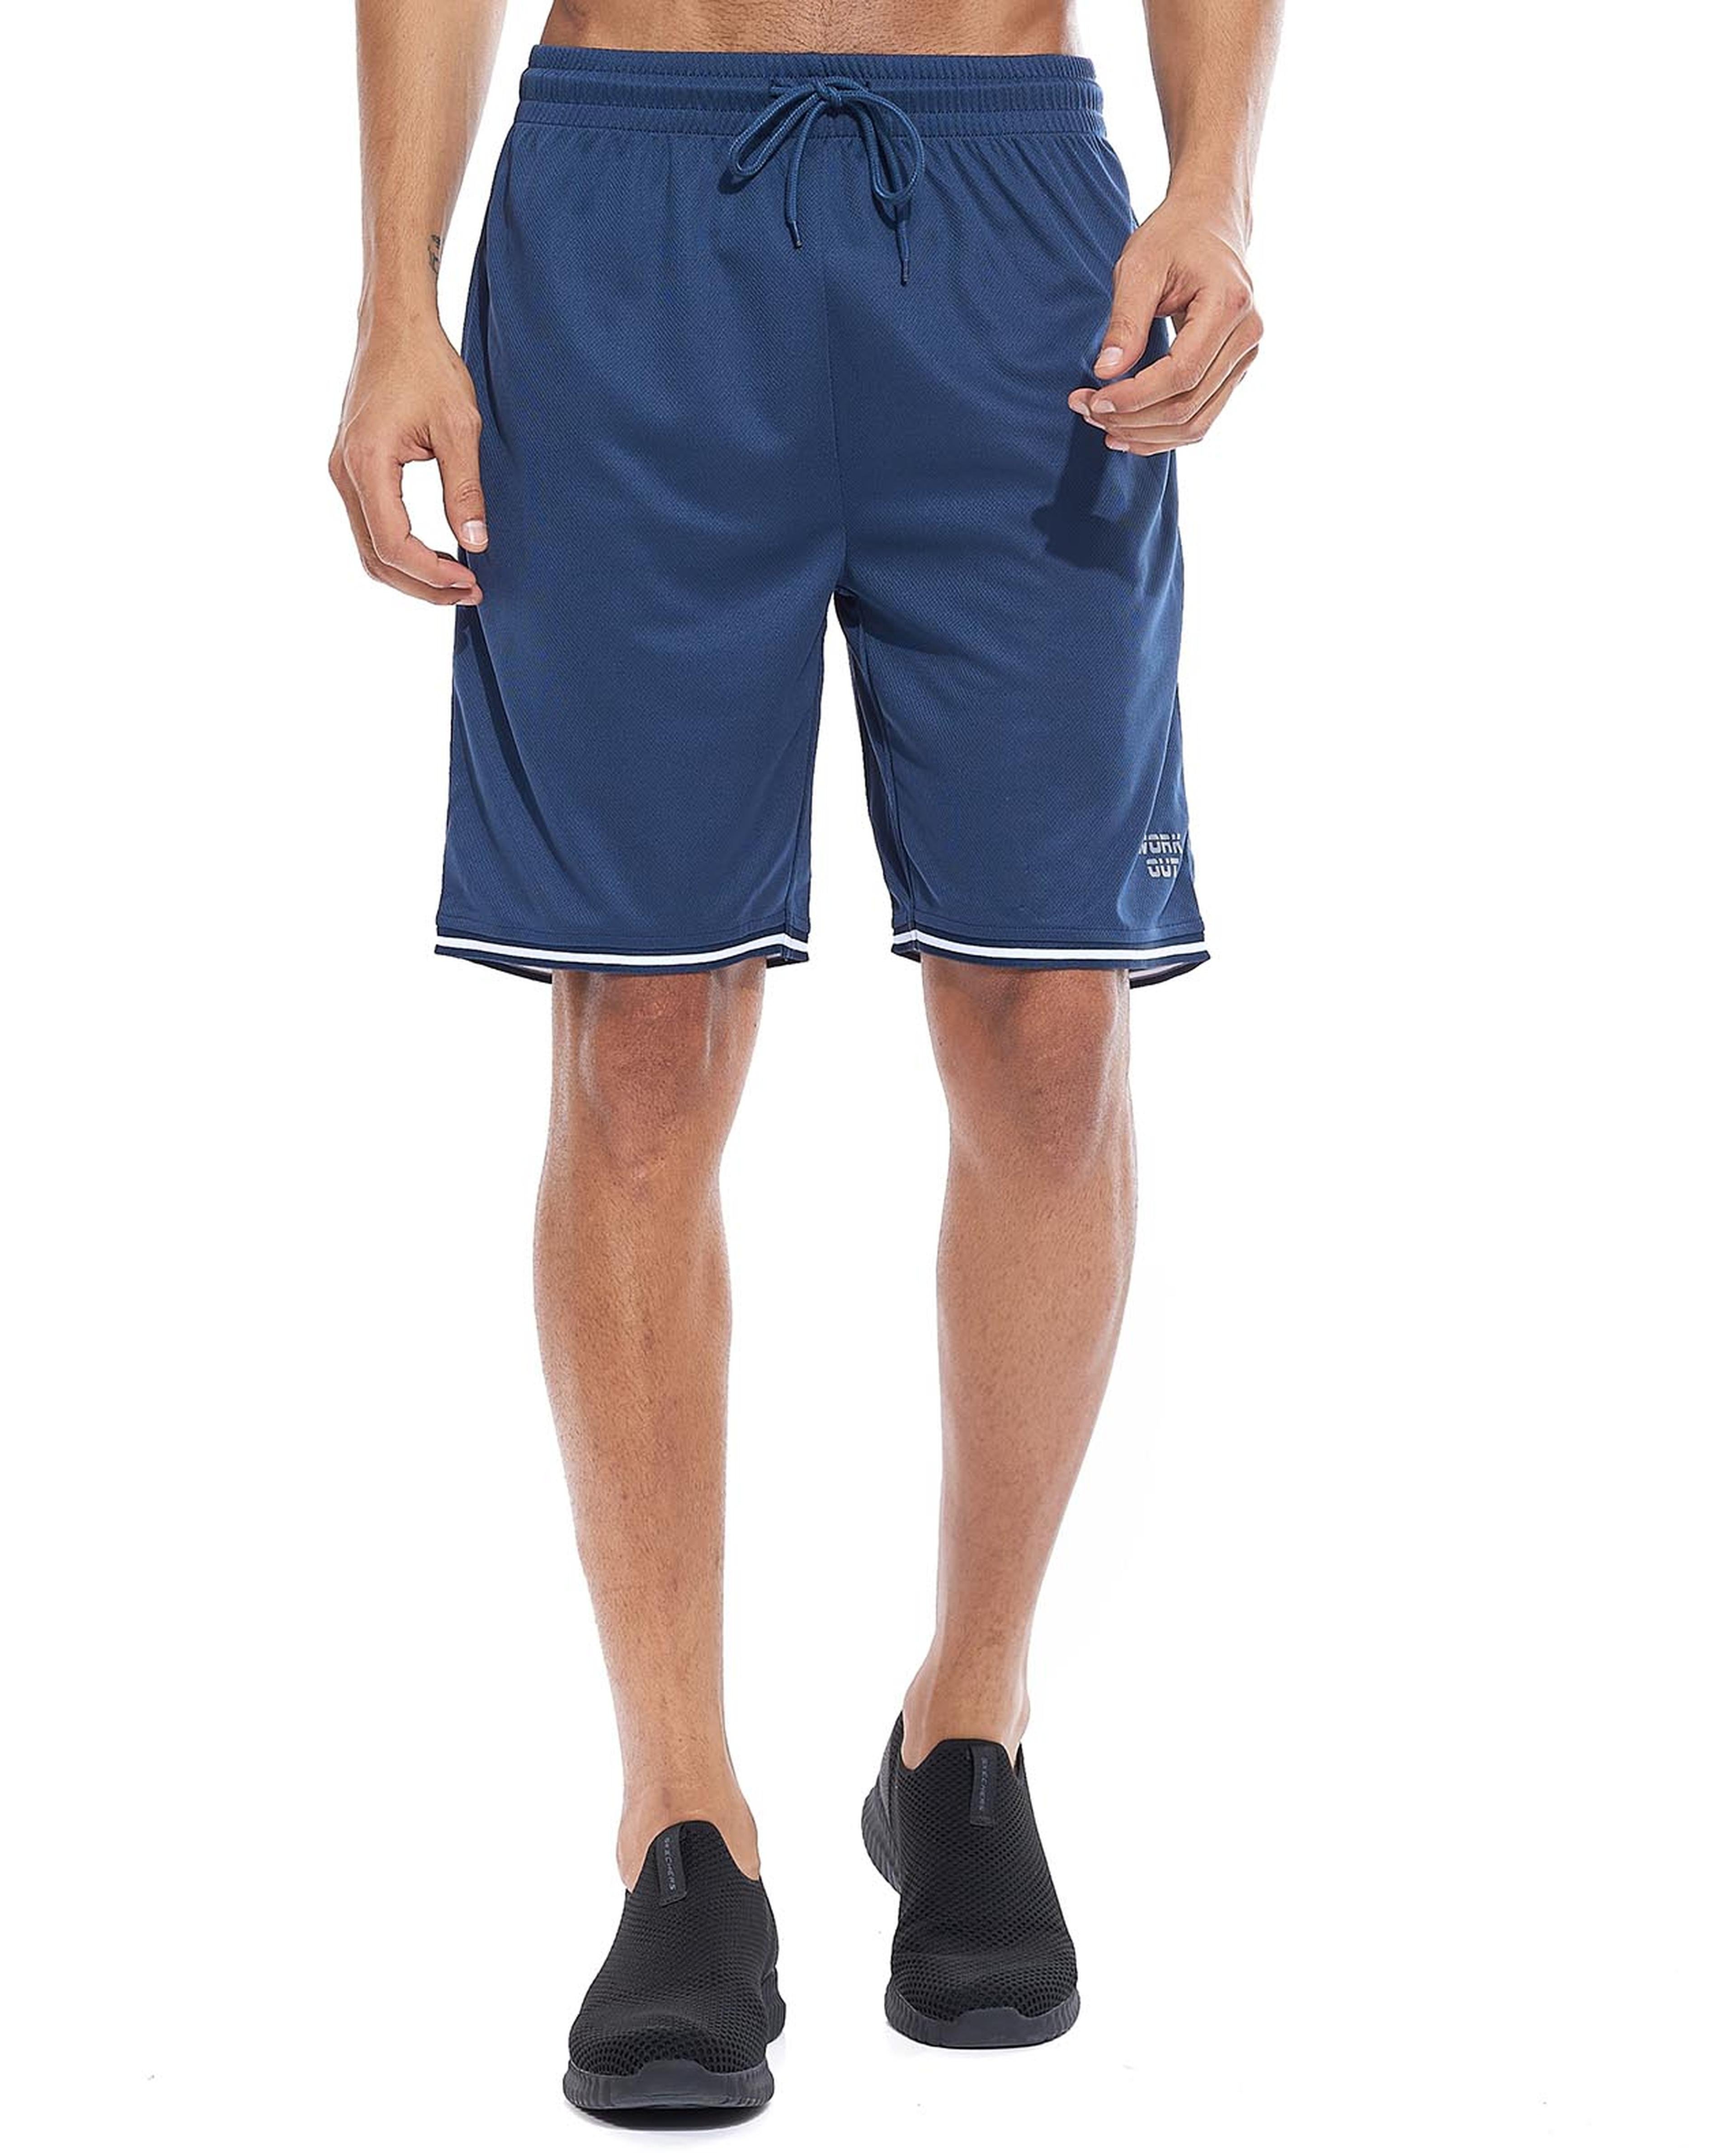 Contrast Trim Active Shorts with Drawstring Waist